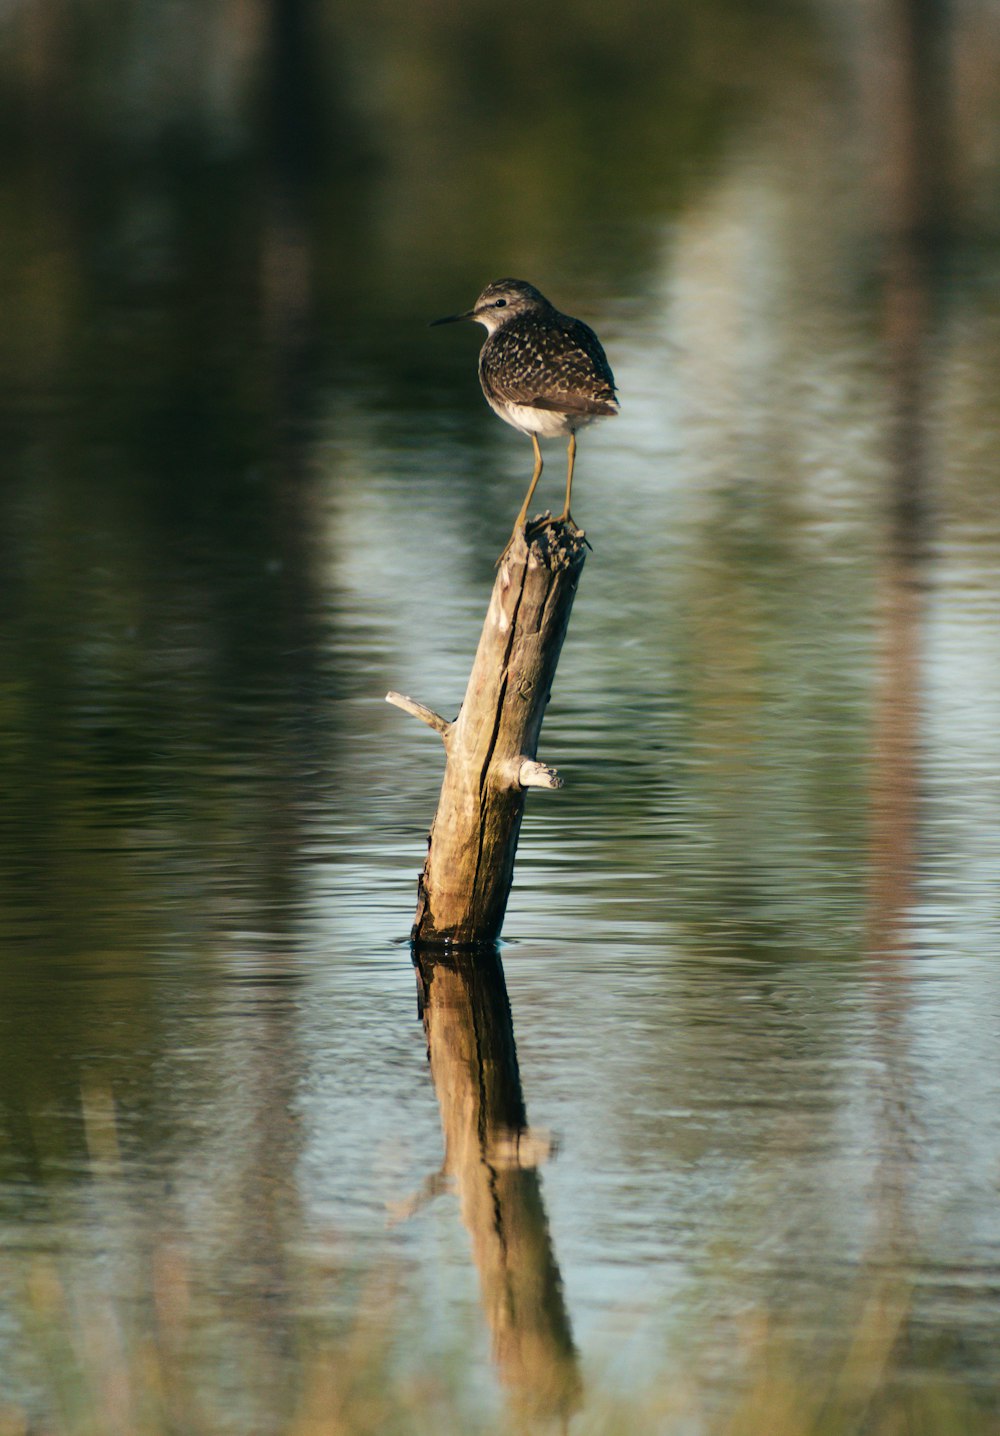 a bird is perched on a log in the water